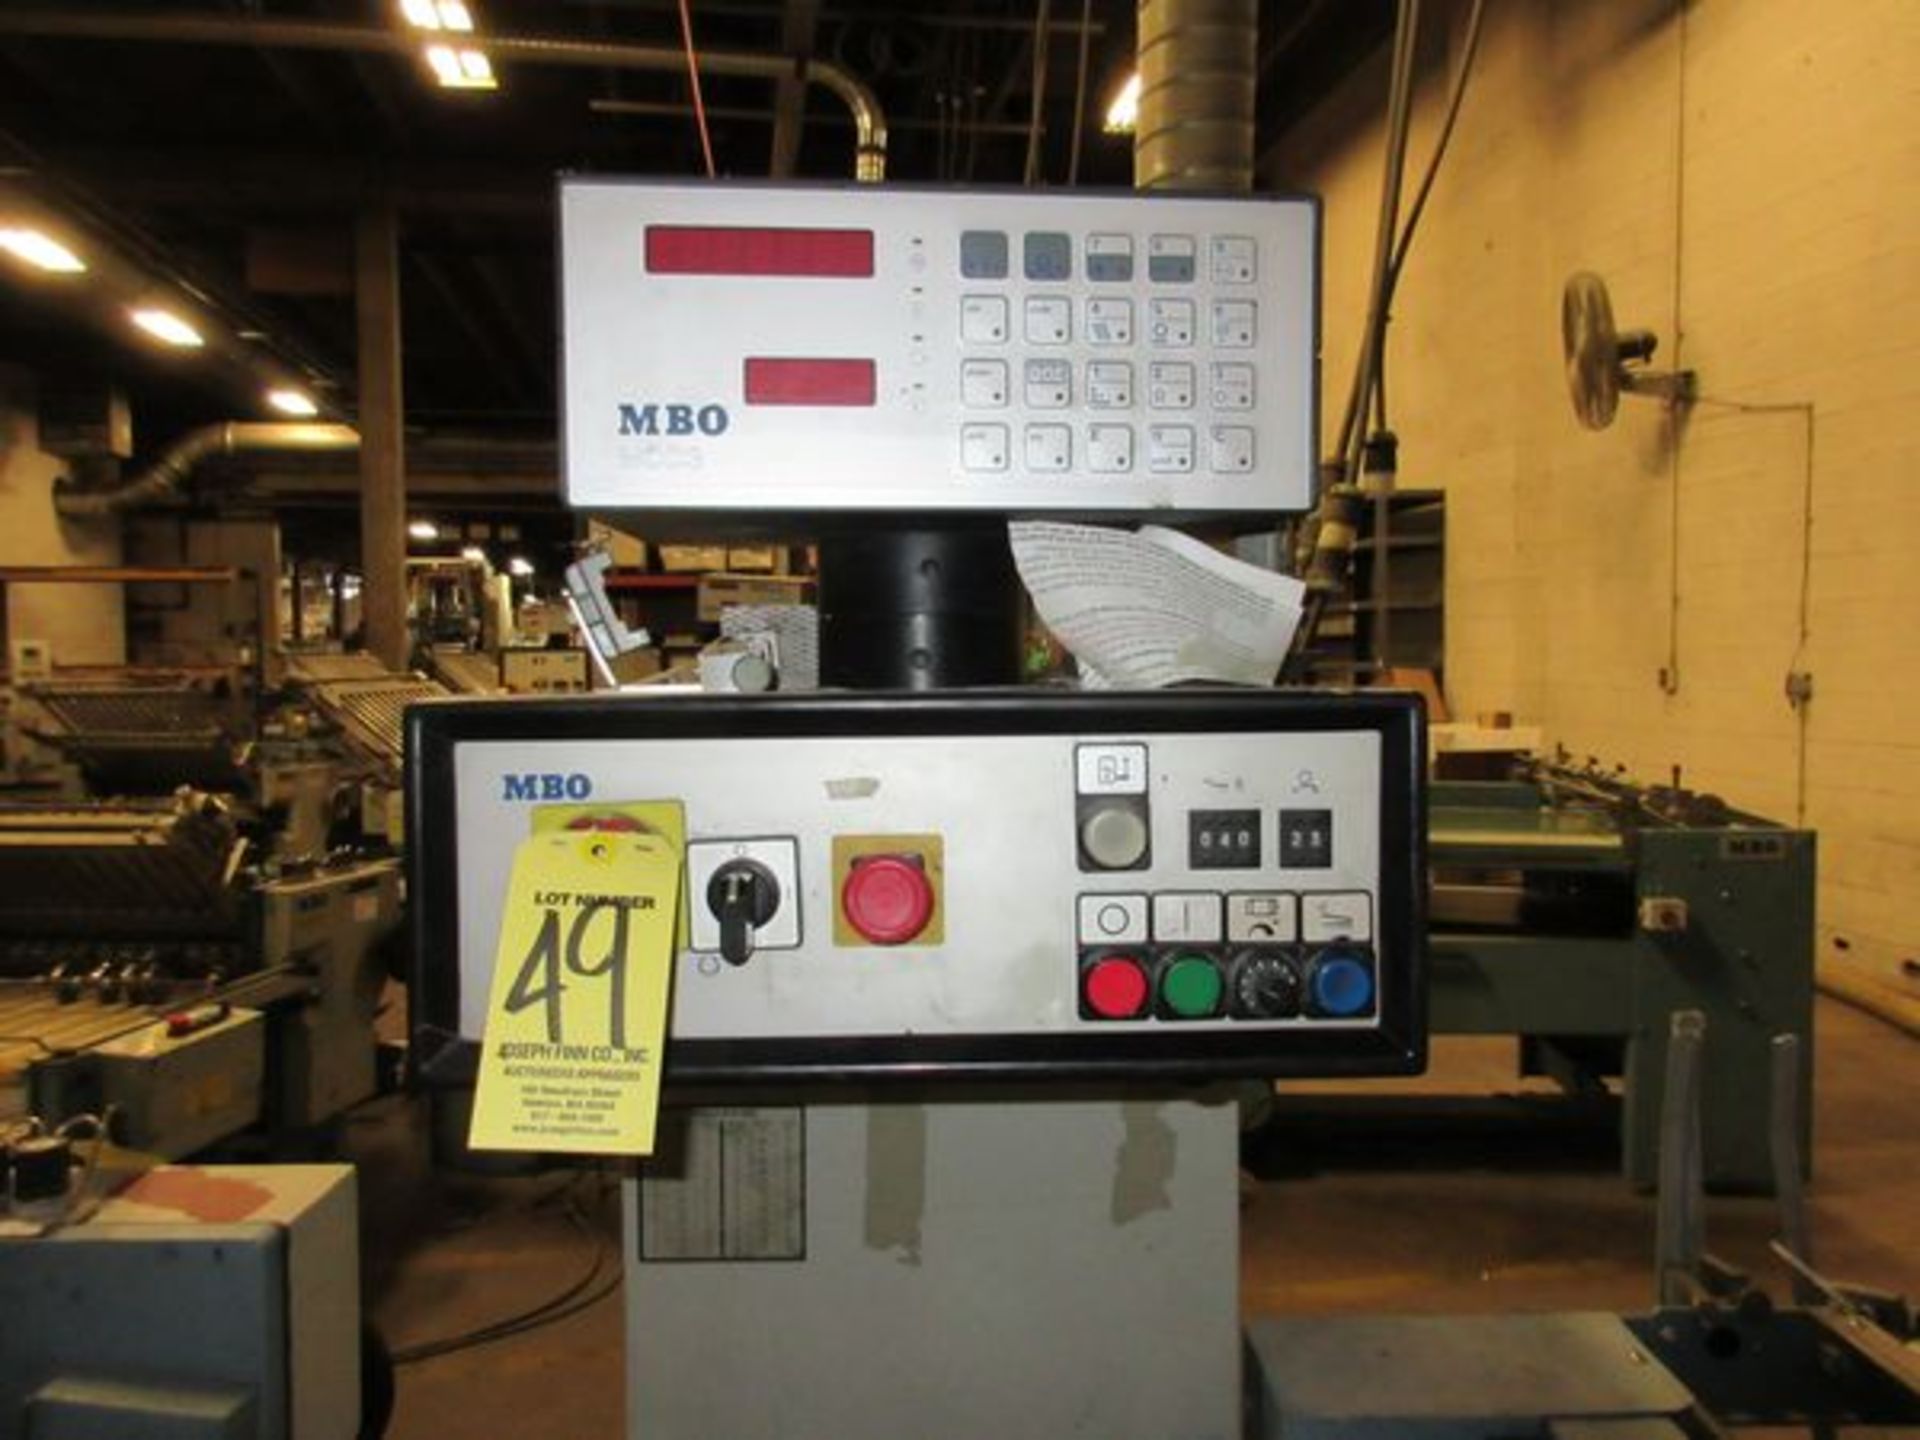 MBO Model B123-C Continuous Feed Folder, Order #960849, s/n N11/07, MCC Counter, Control, Exit - Image 3 of 6